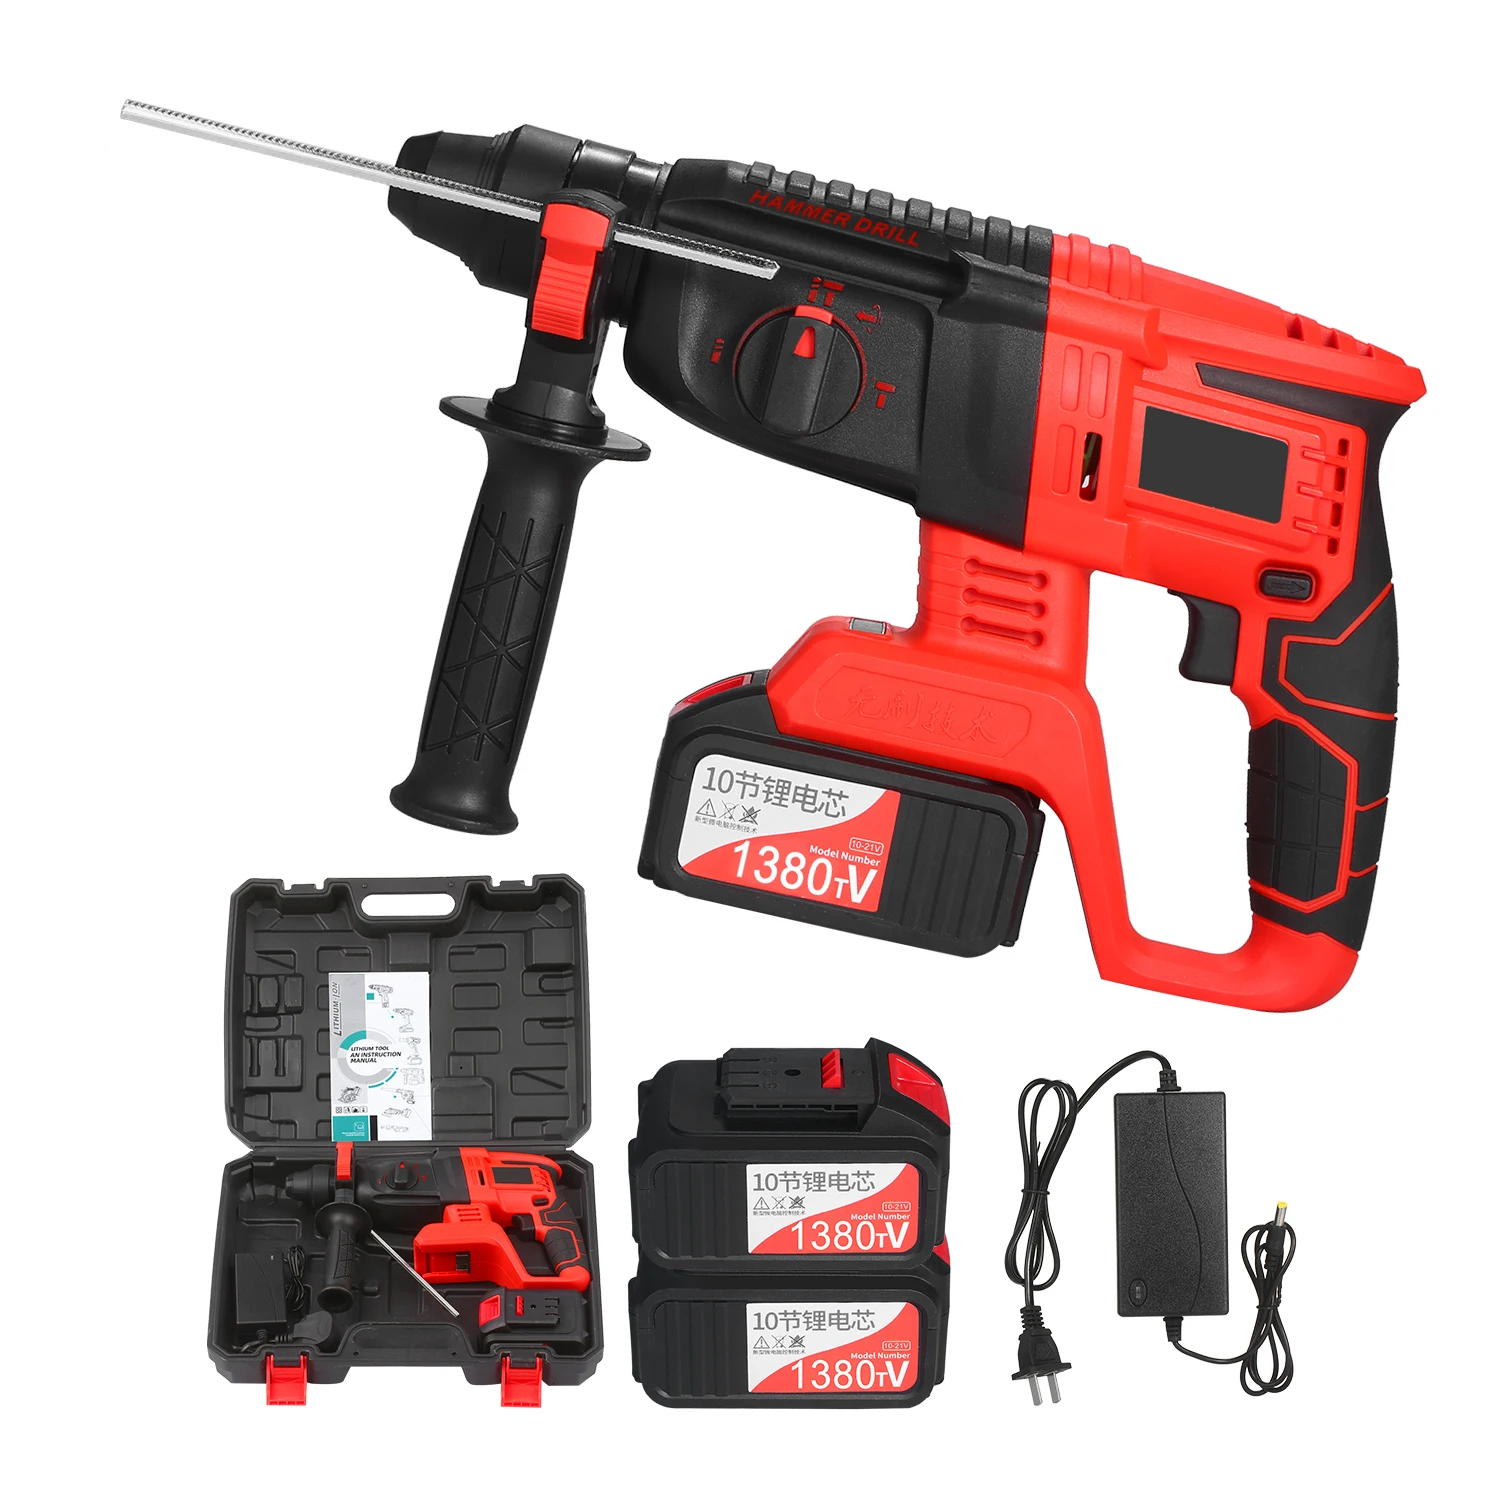 

21V Brushless Cordless Rotary Hammer Drill SDS Plus Variable Speed Impact Hammer Kit Variable-Speed Electric Pick Electric Drill